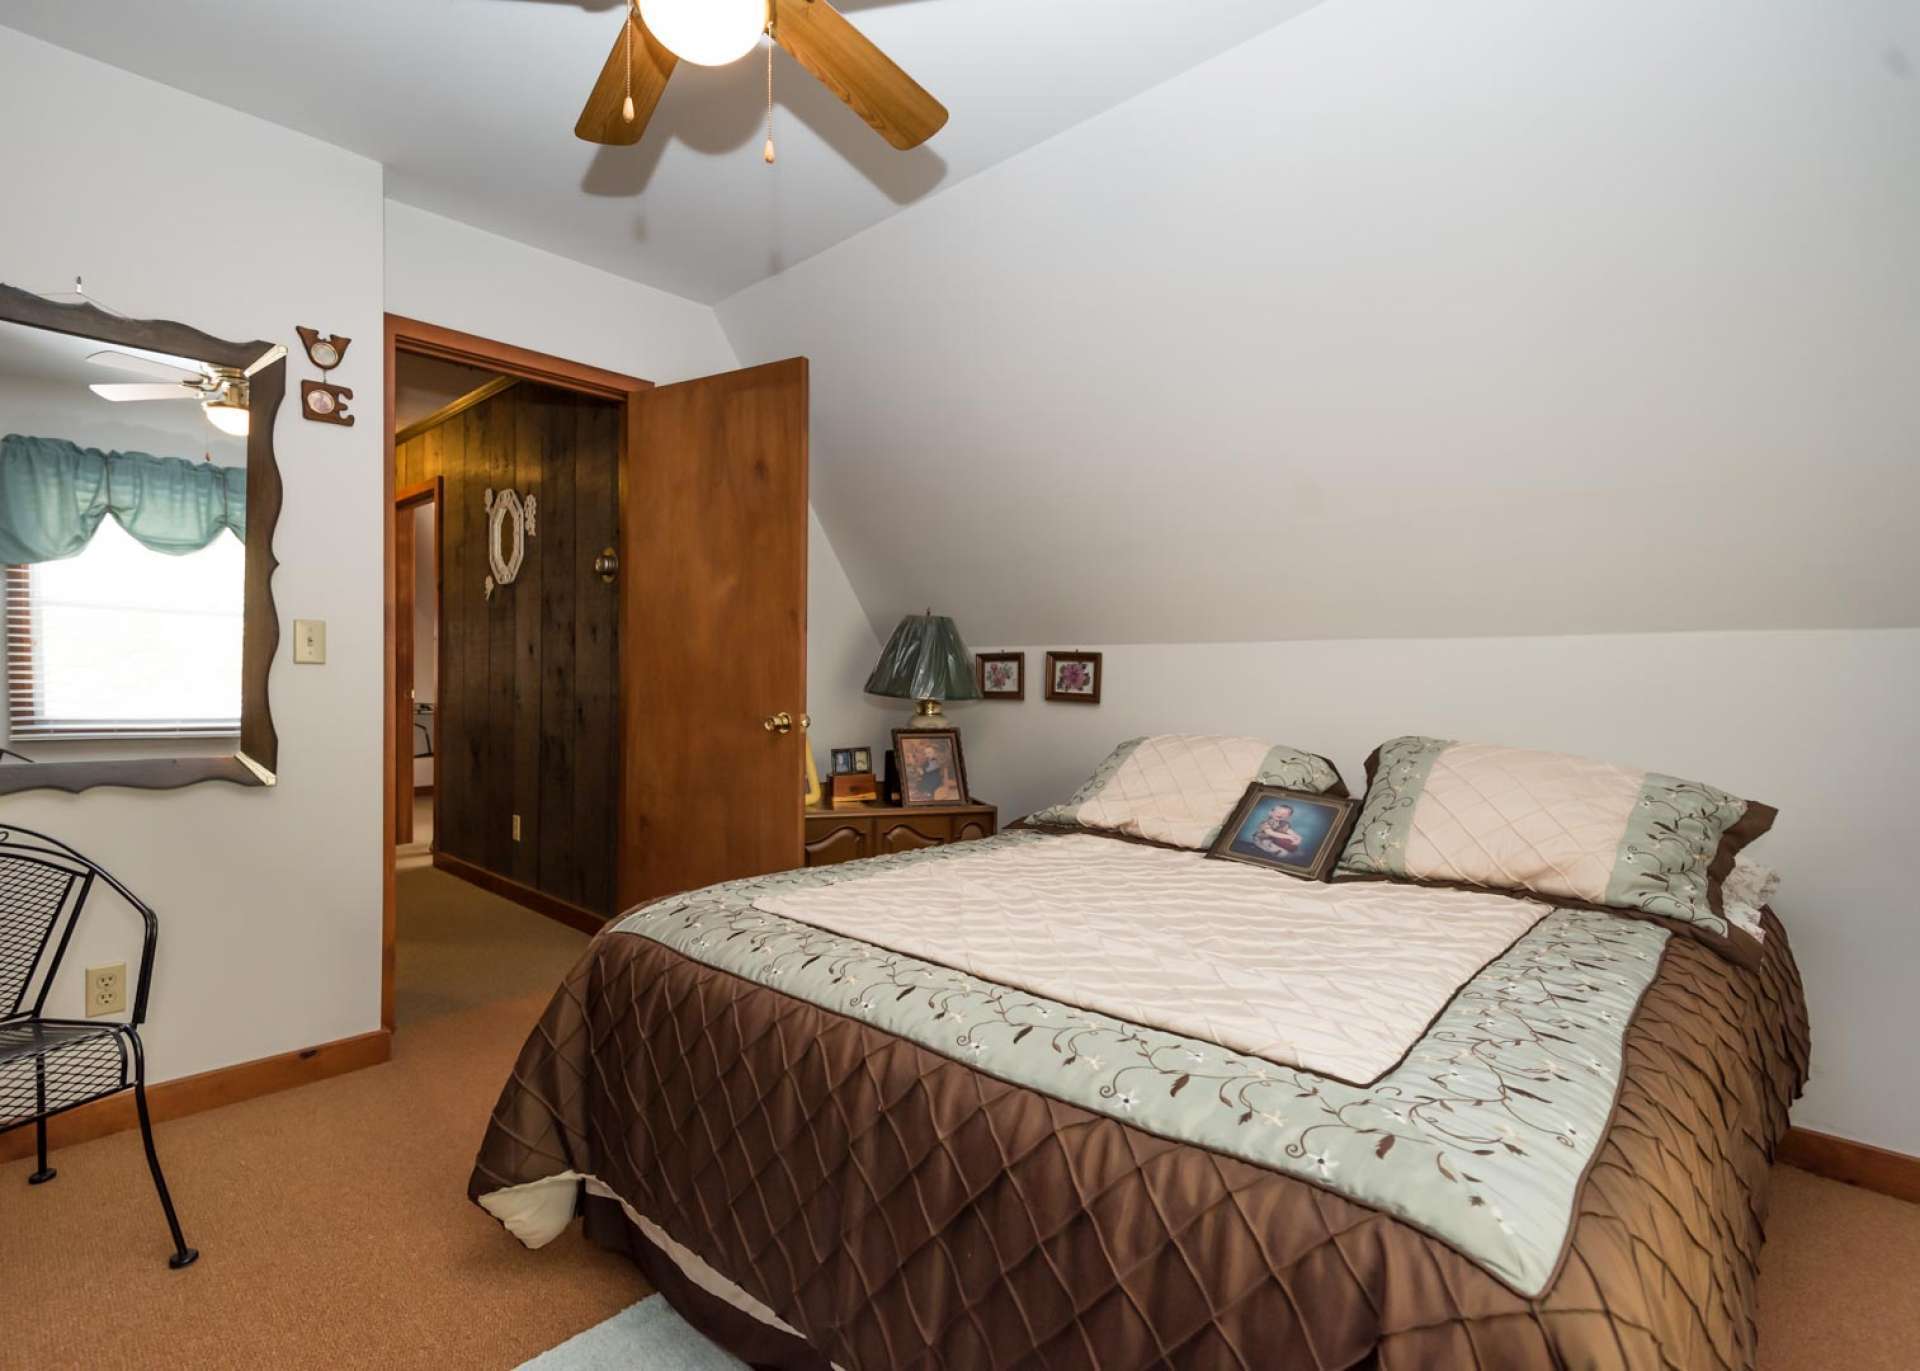 This upper level bedroom is spacious with double closets and warm carpeted flooring.